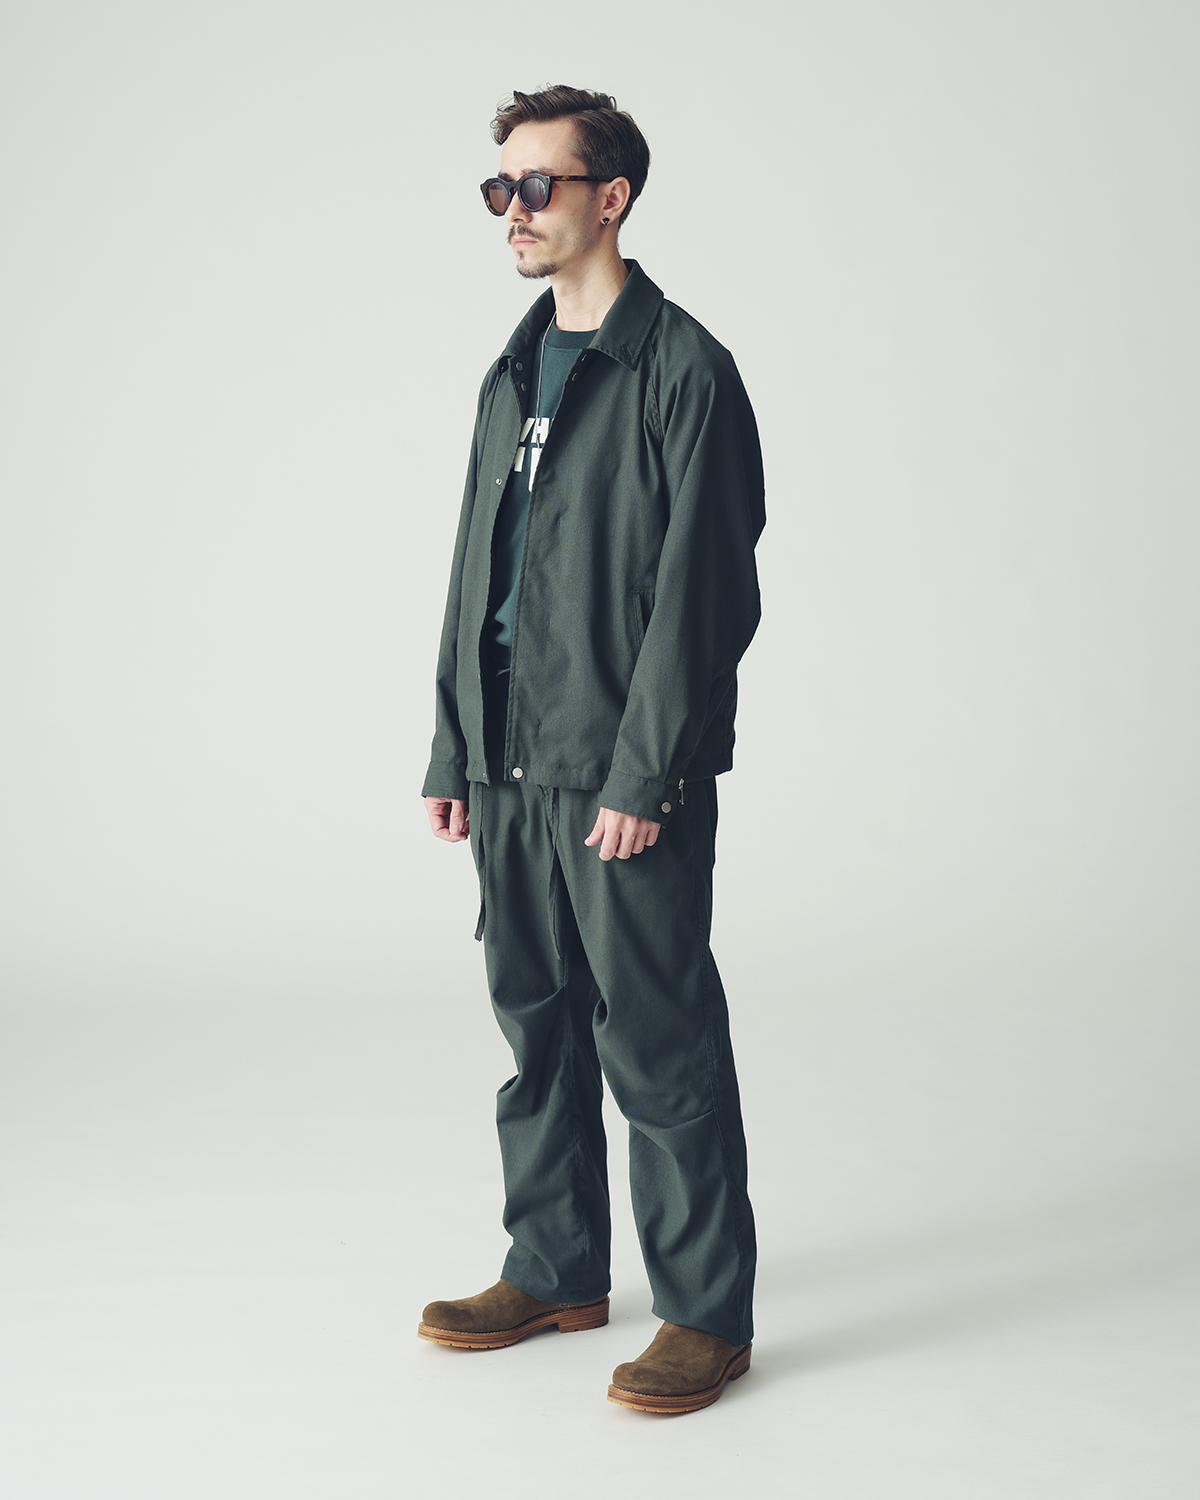 styles | nonnative 24SS COLLECTION